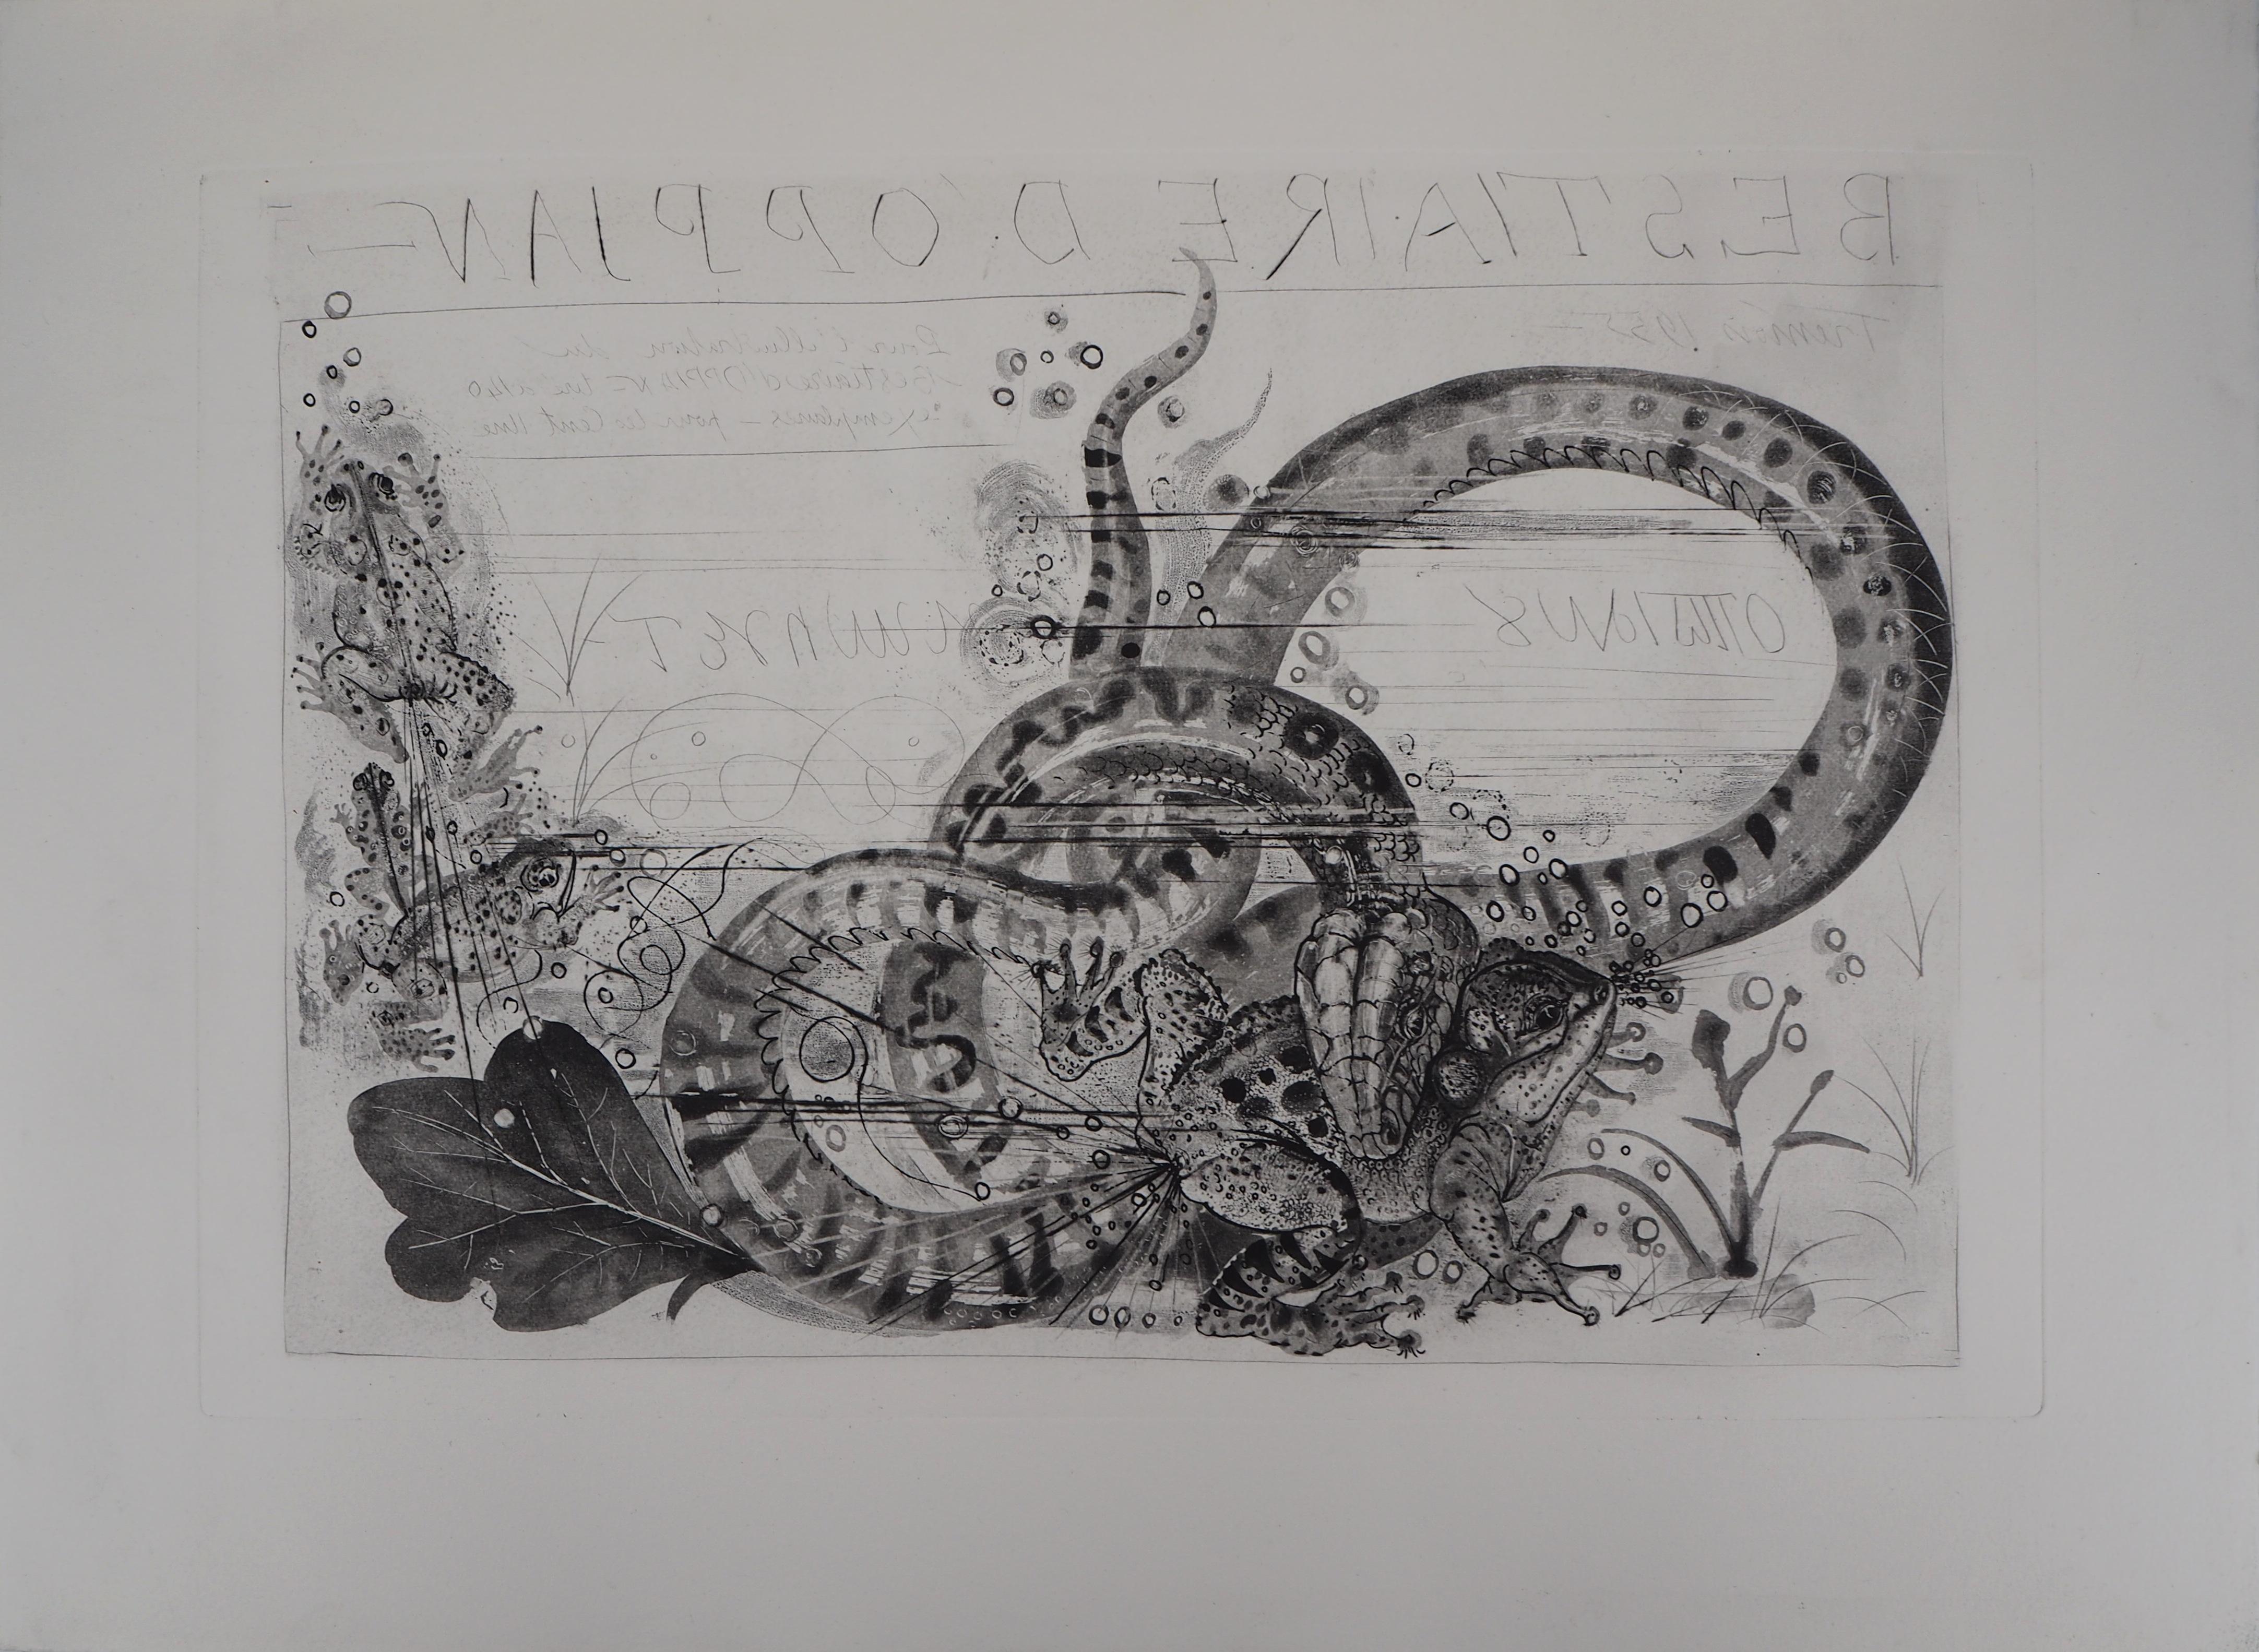 Oppian : Snake and Toad - Original Etching - Gray Animal Print by Pierre-Yves Trémois